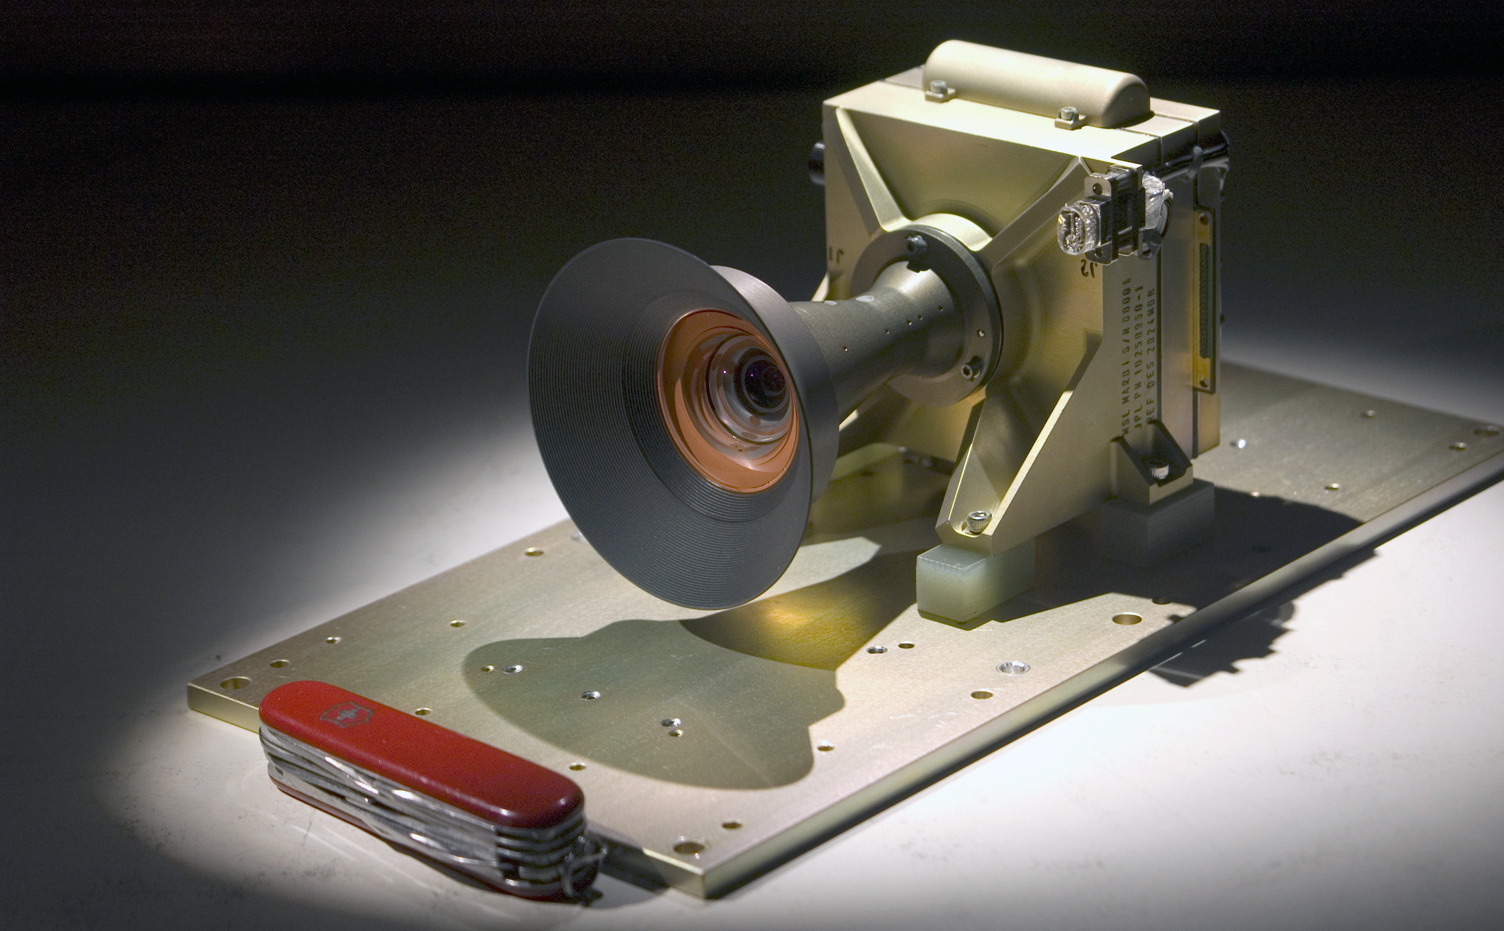 This Mars Descent Imager (MARDI) camera will fly on the Curiosity rover of NASA's Mars Science Laboratory mission.